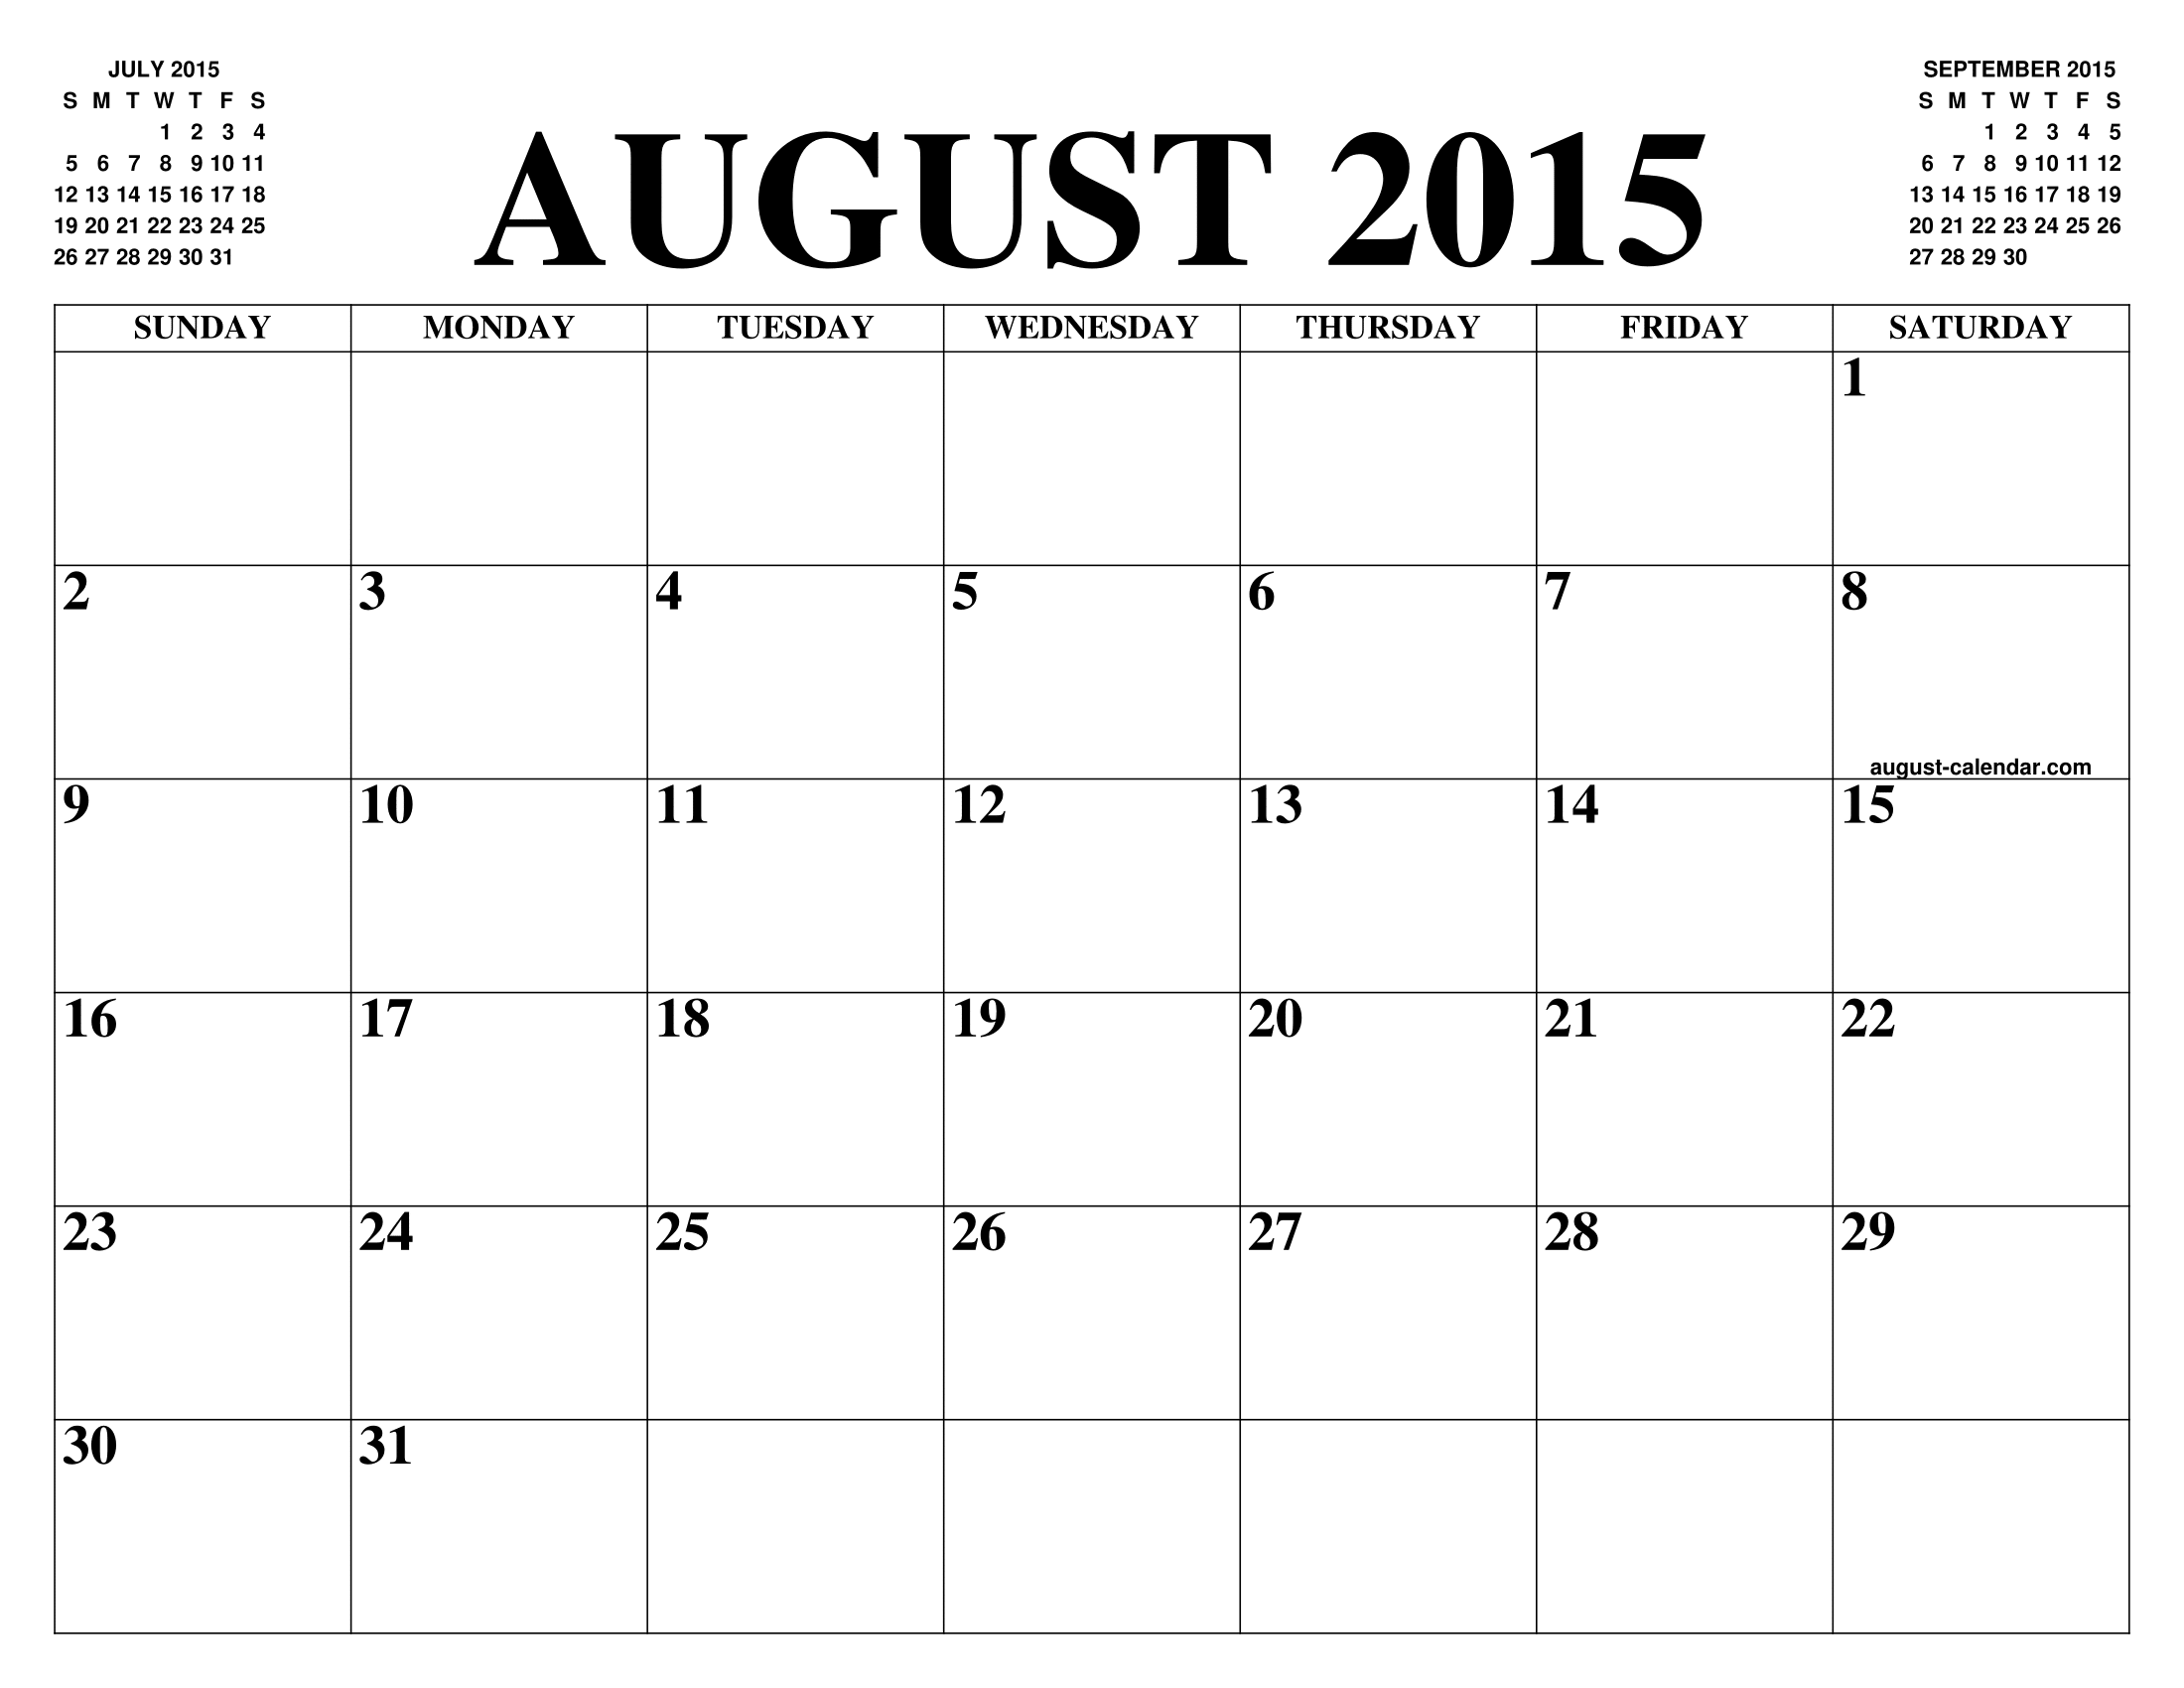 August, 2015